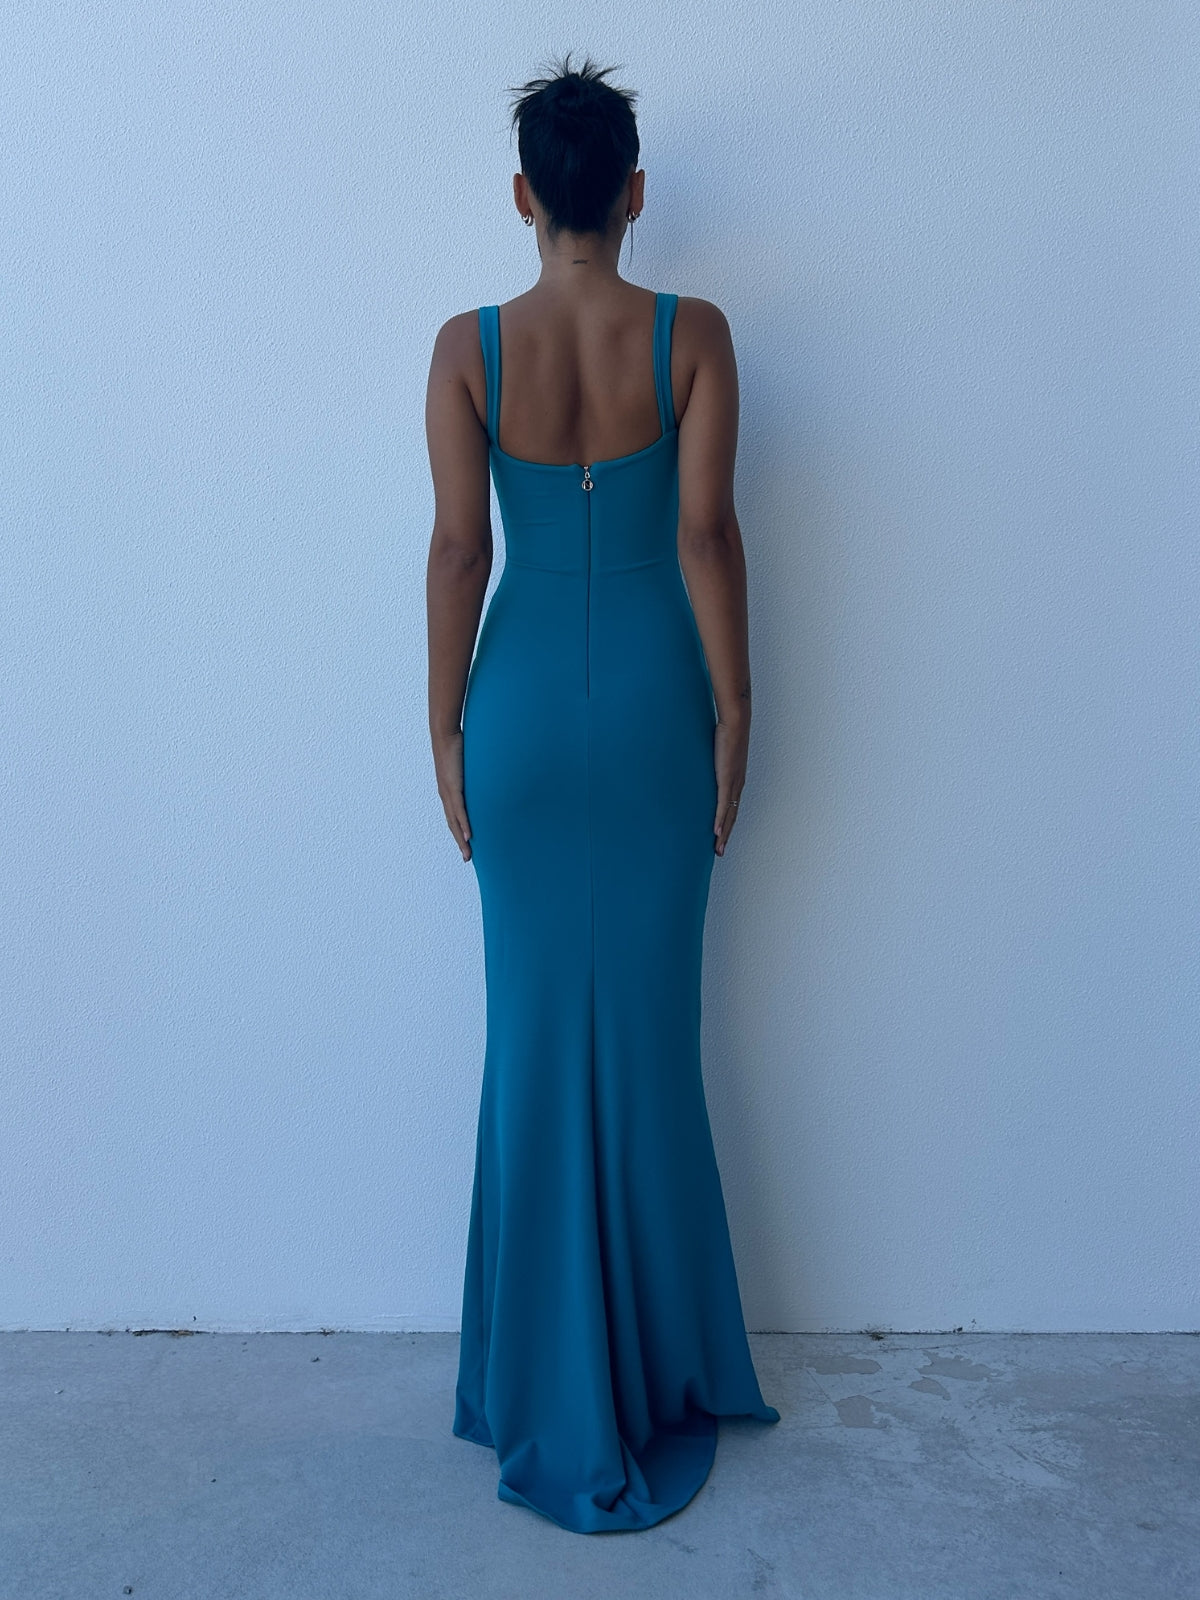 Romance Gown - Teal